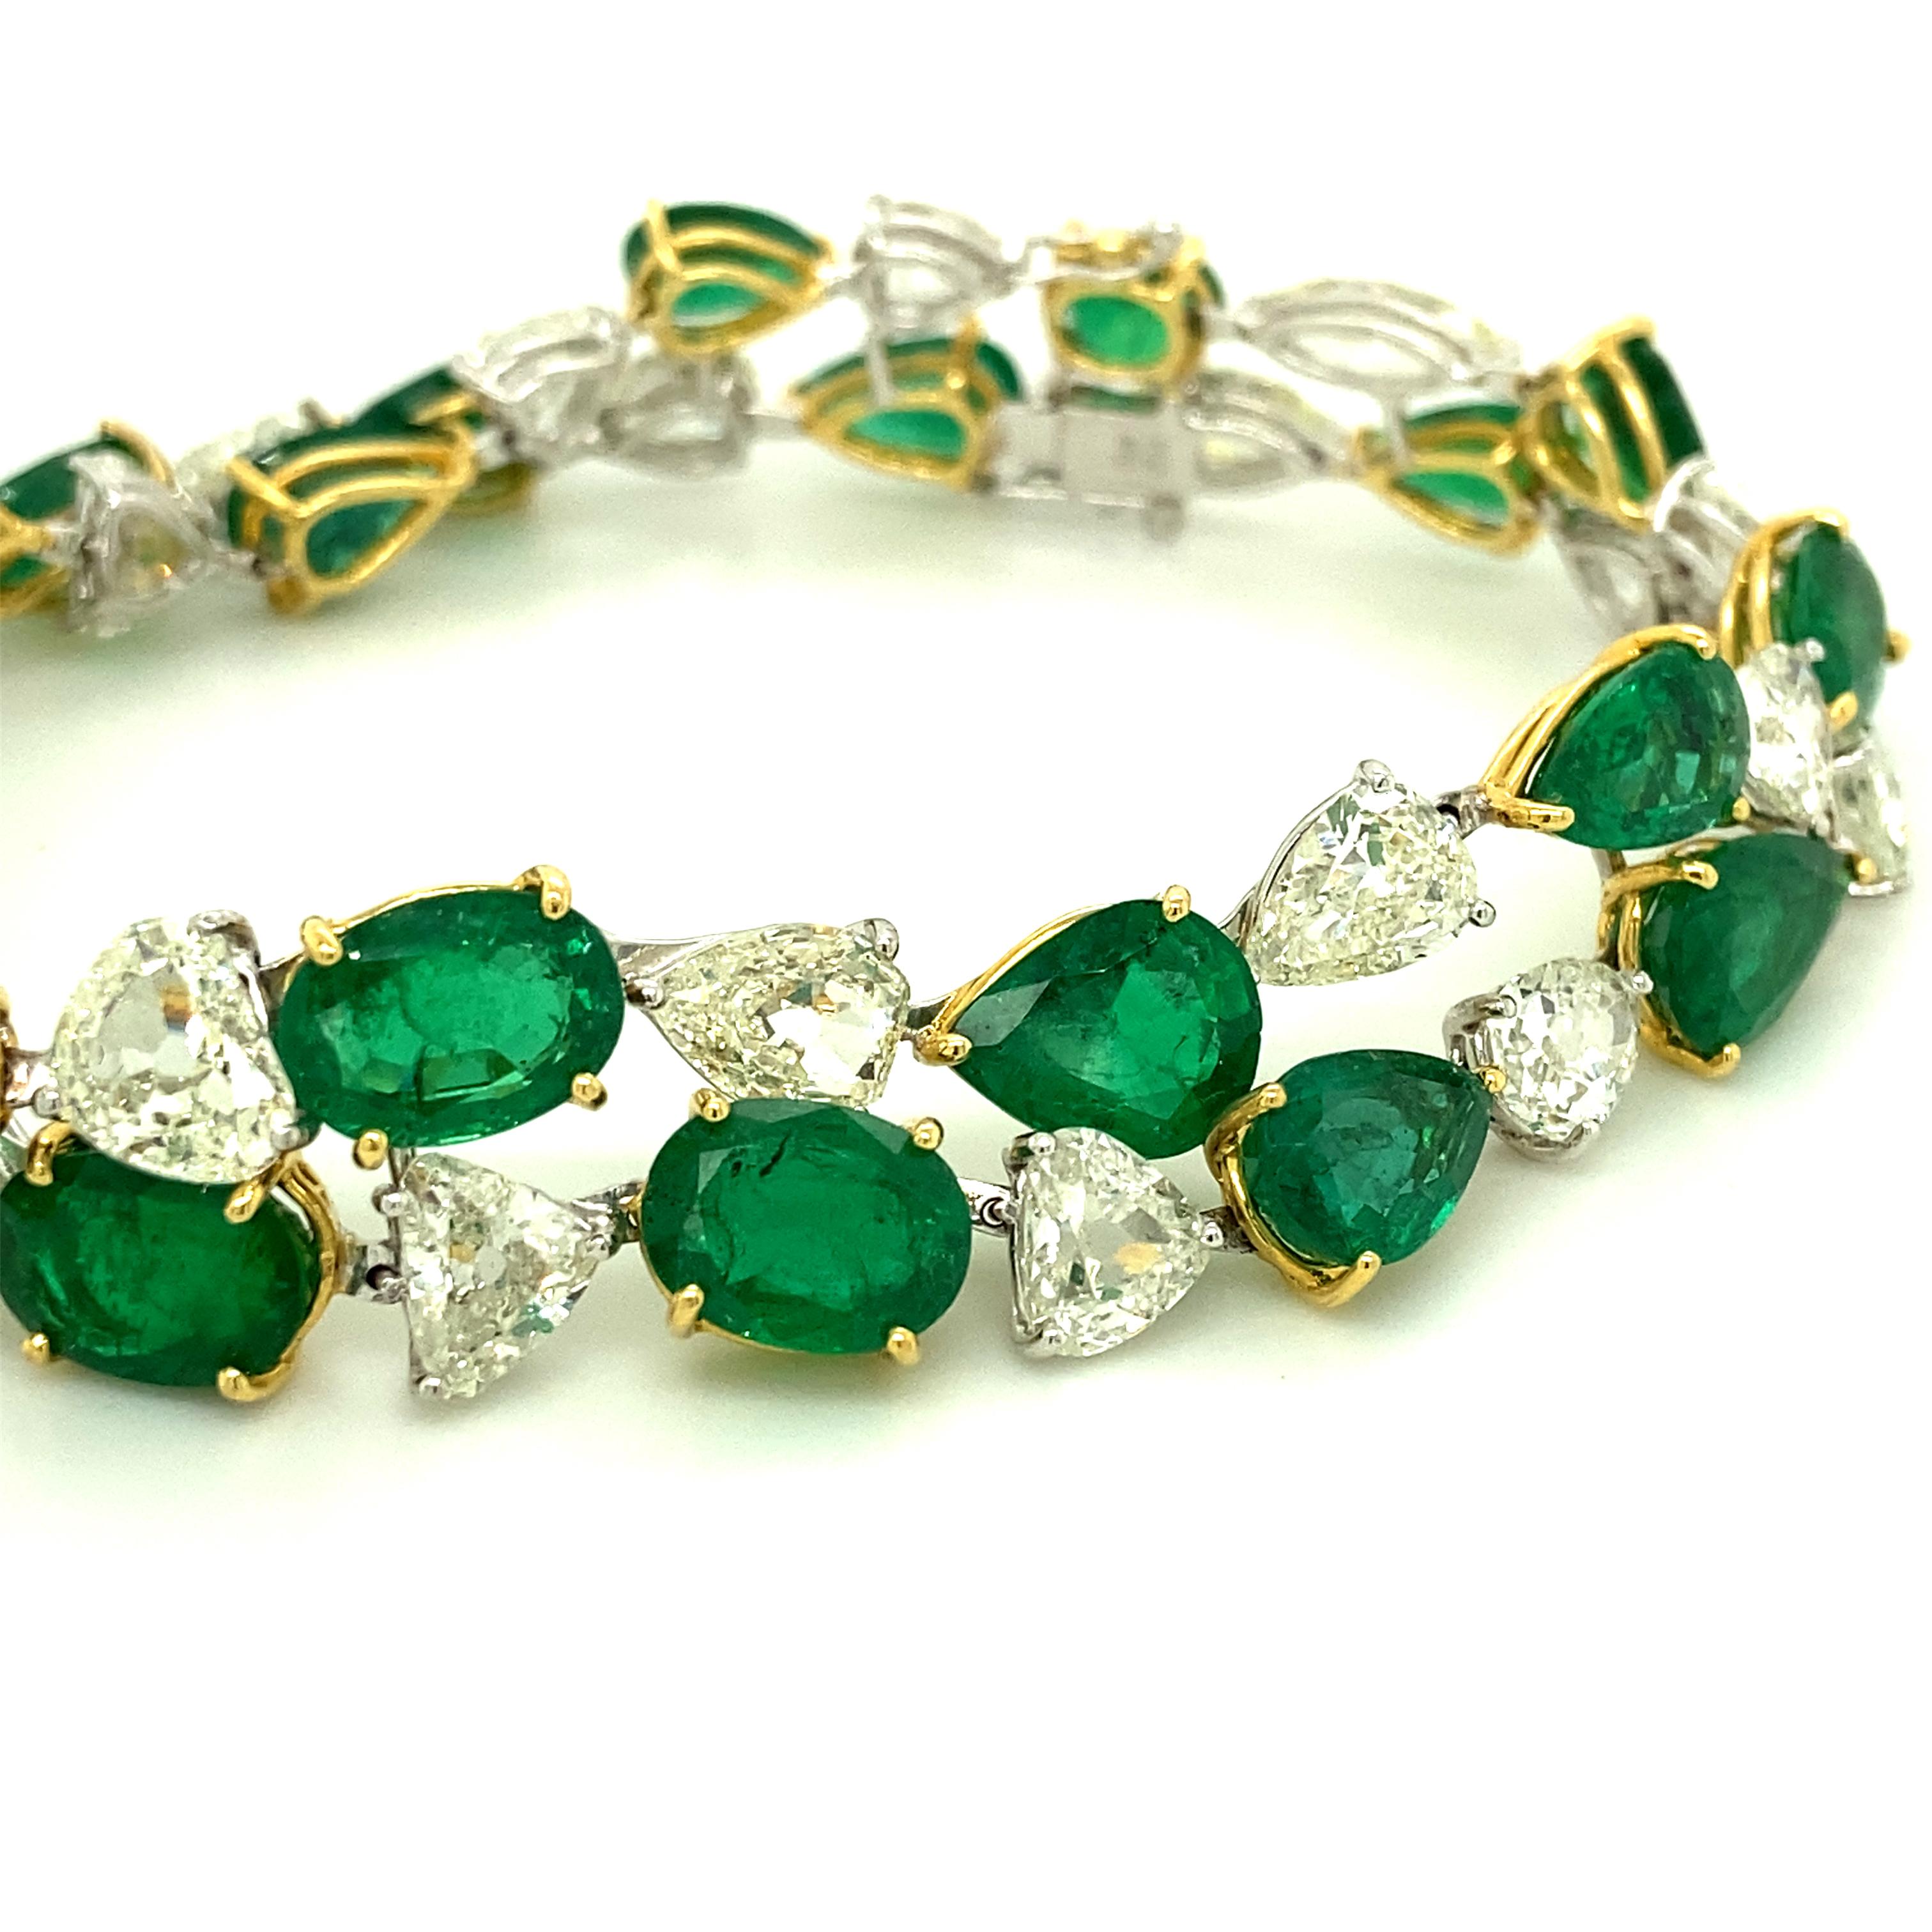 32.62 Carat Emerald and White Old Cut Diamond Gold Bracelet:

A spectacular piece of jewellery, it features twenty-two stunning oval and pear shaped emeralds weighing 32.62 carat, along with twenty-two gorgeous old-mine cut white diamonds weighing